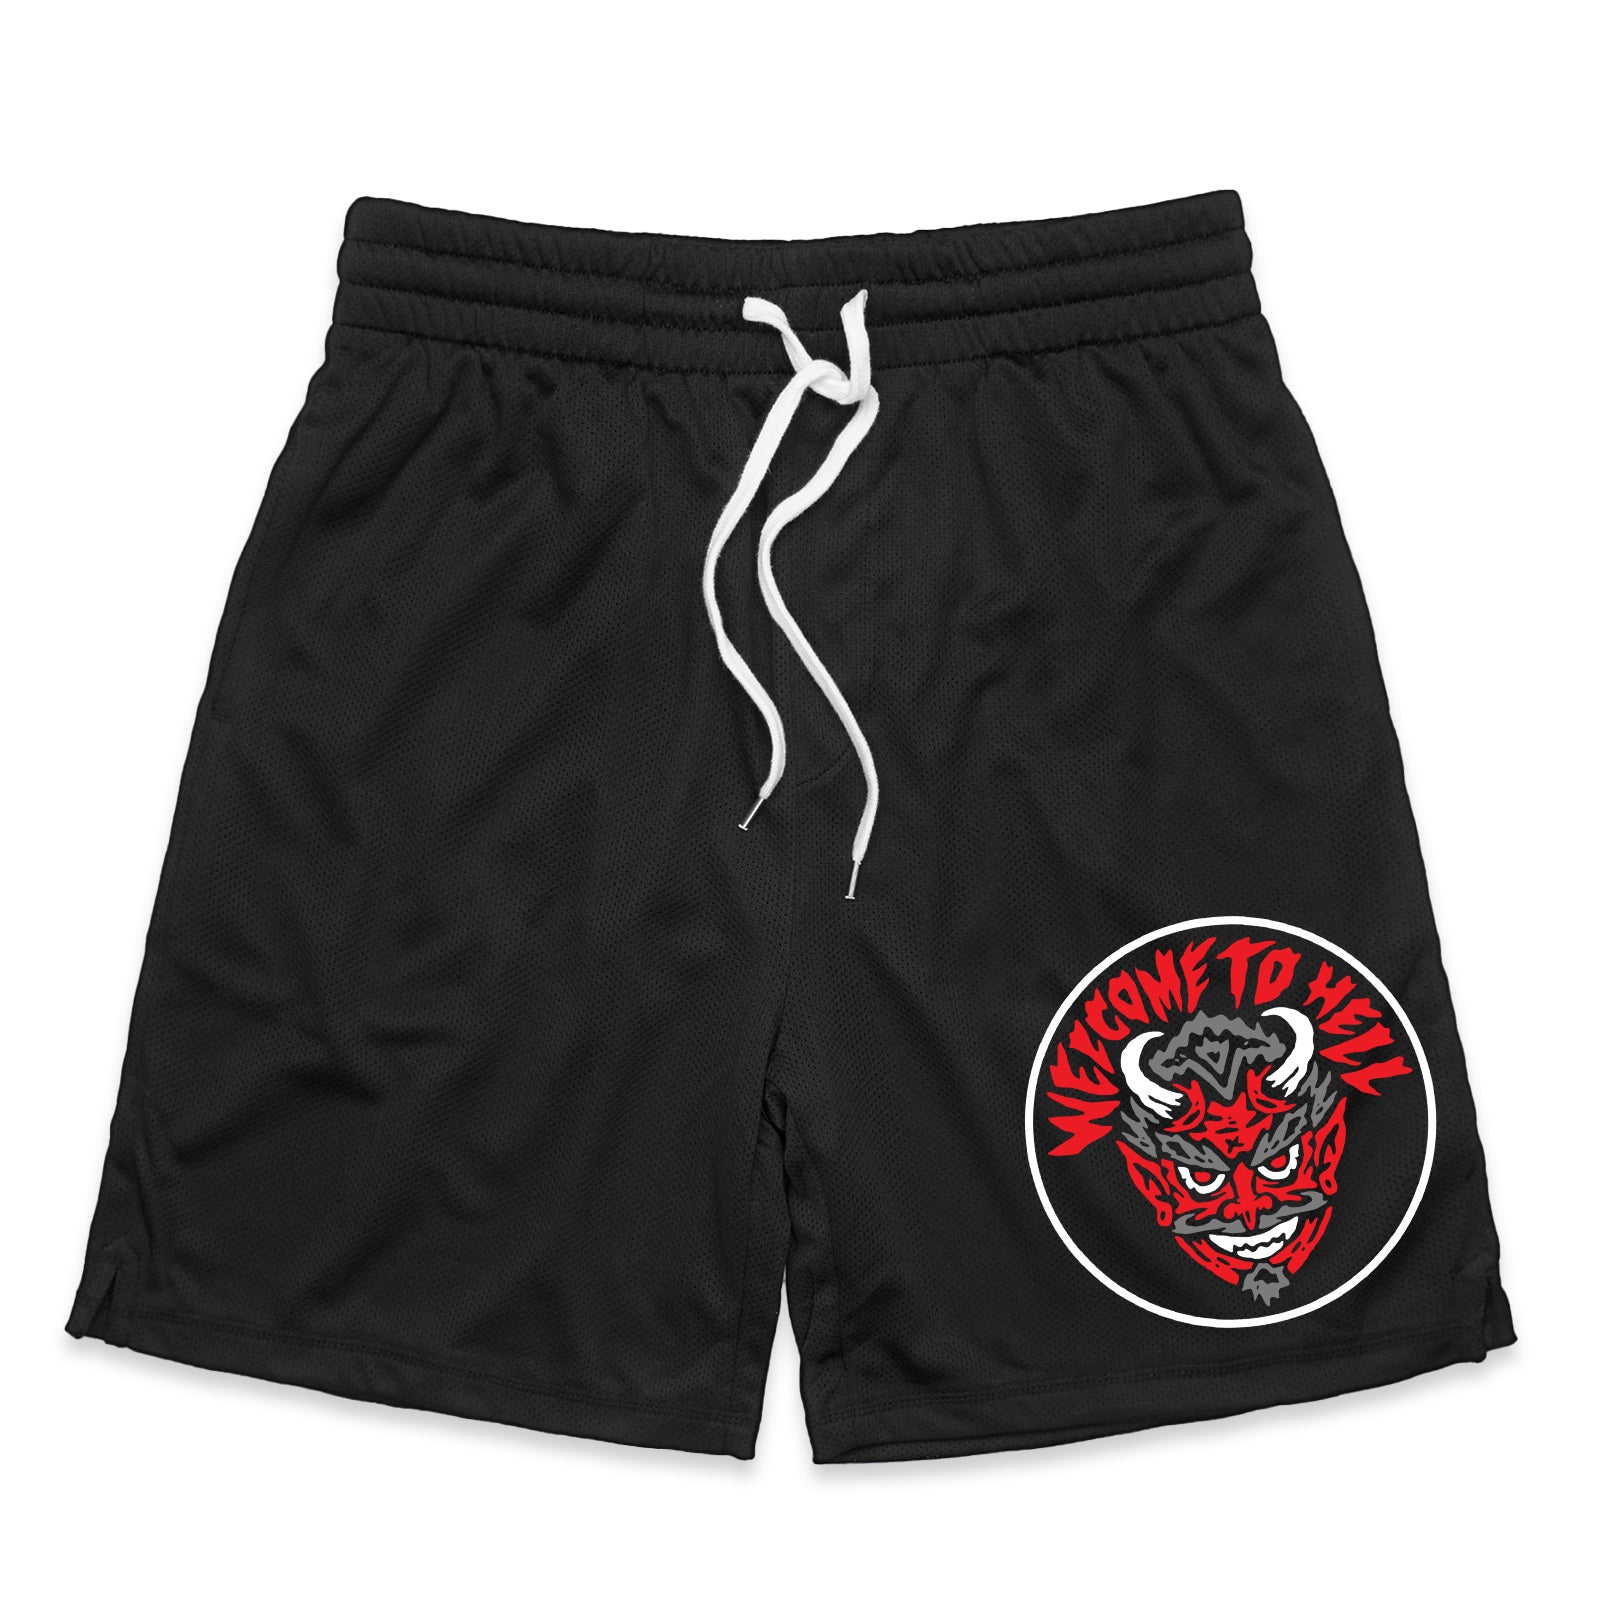 Welcome To Hell Gym Shorts